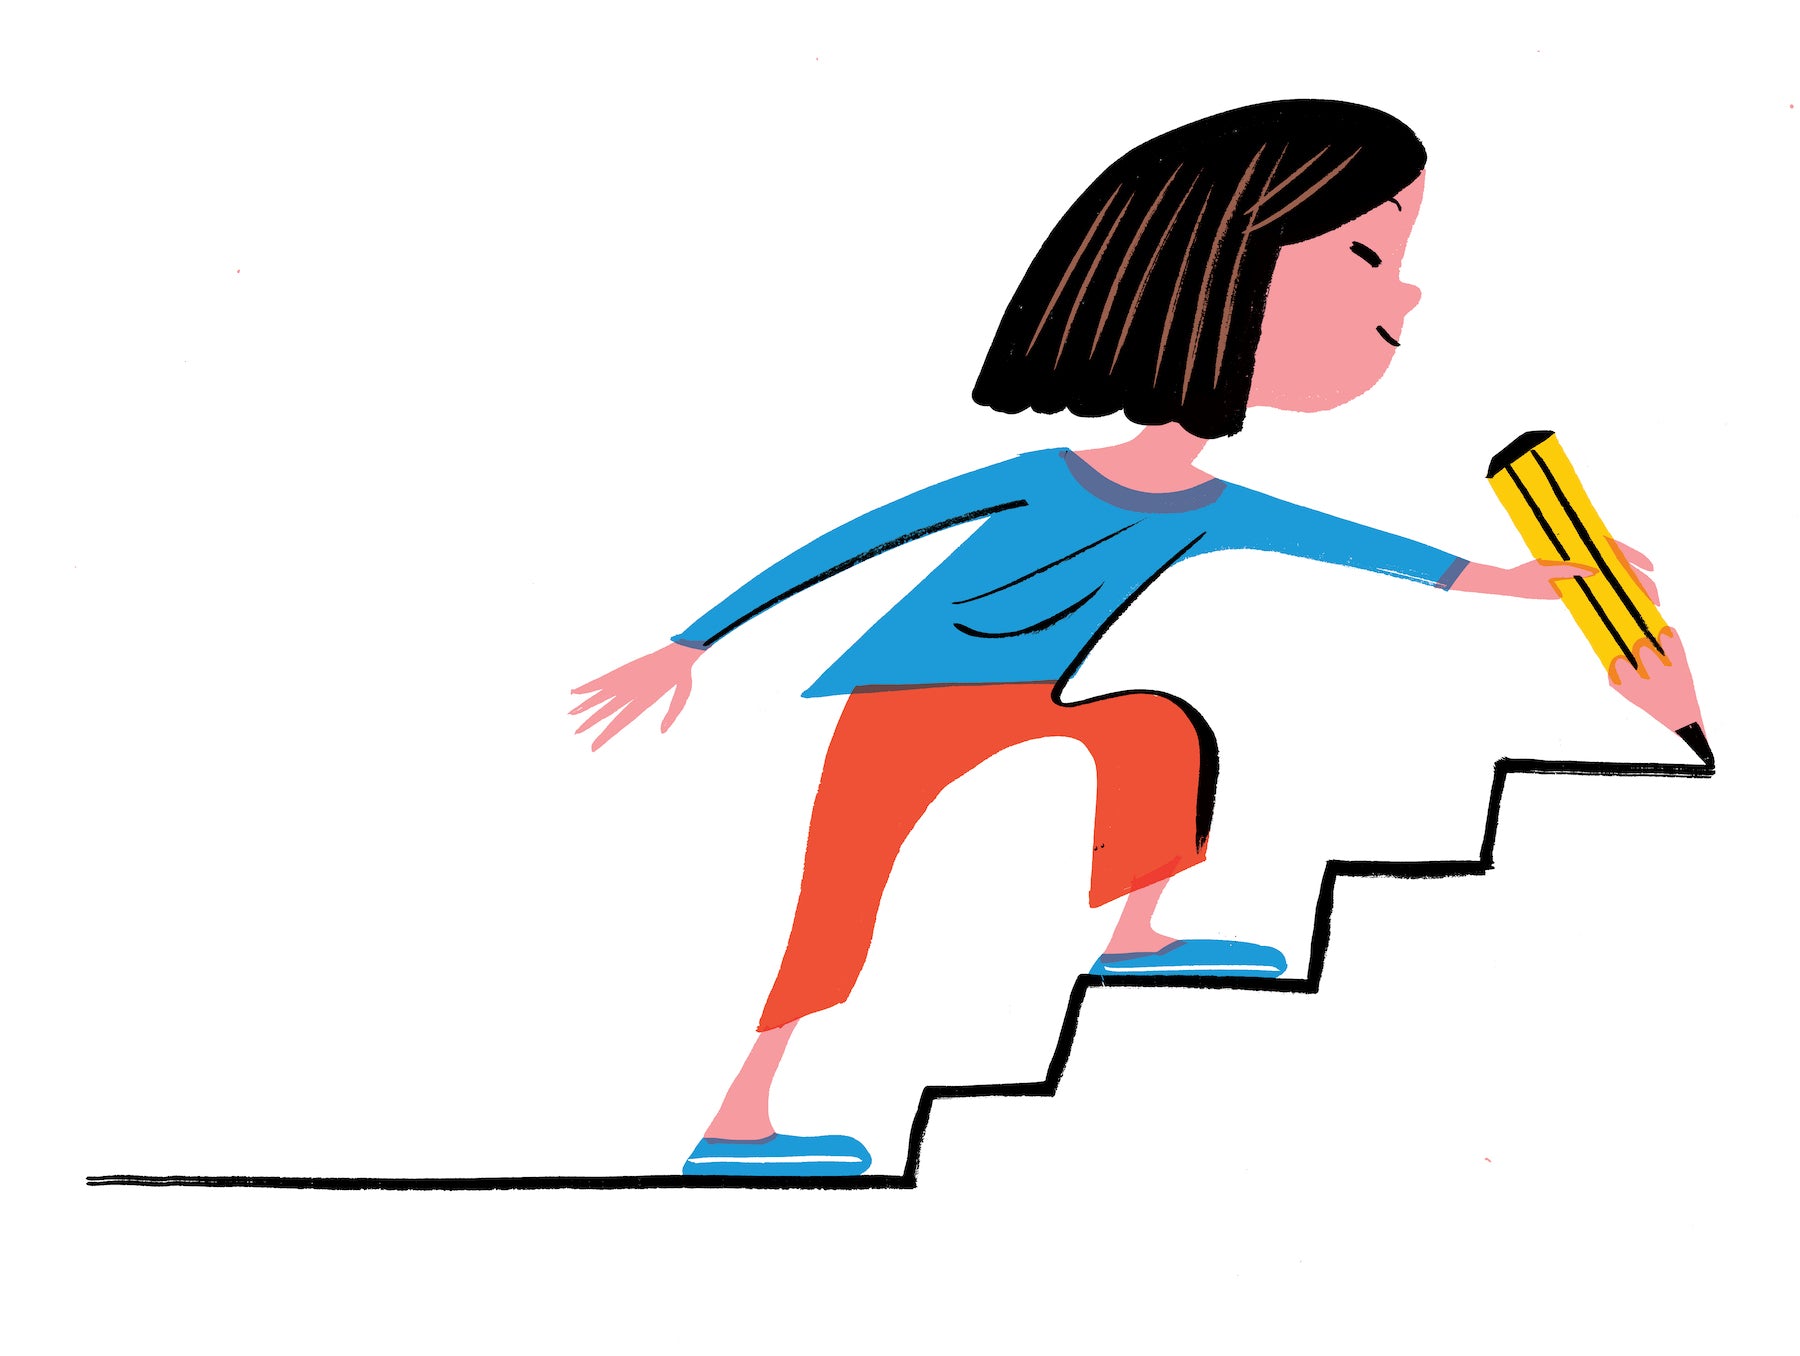 Illustration of a young girl walking up steps that she is drawing, as a metaphor for carving her own path forward.